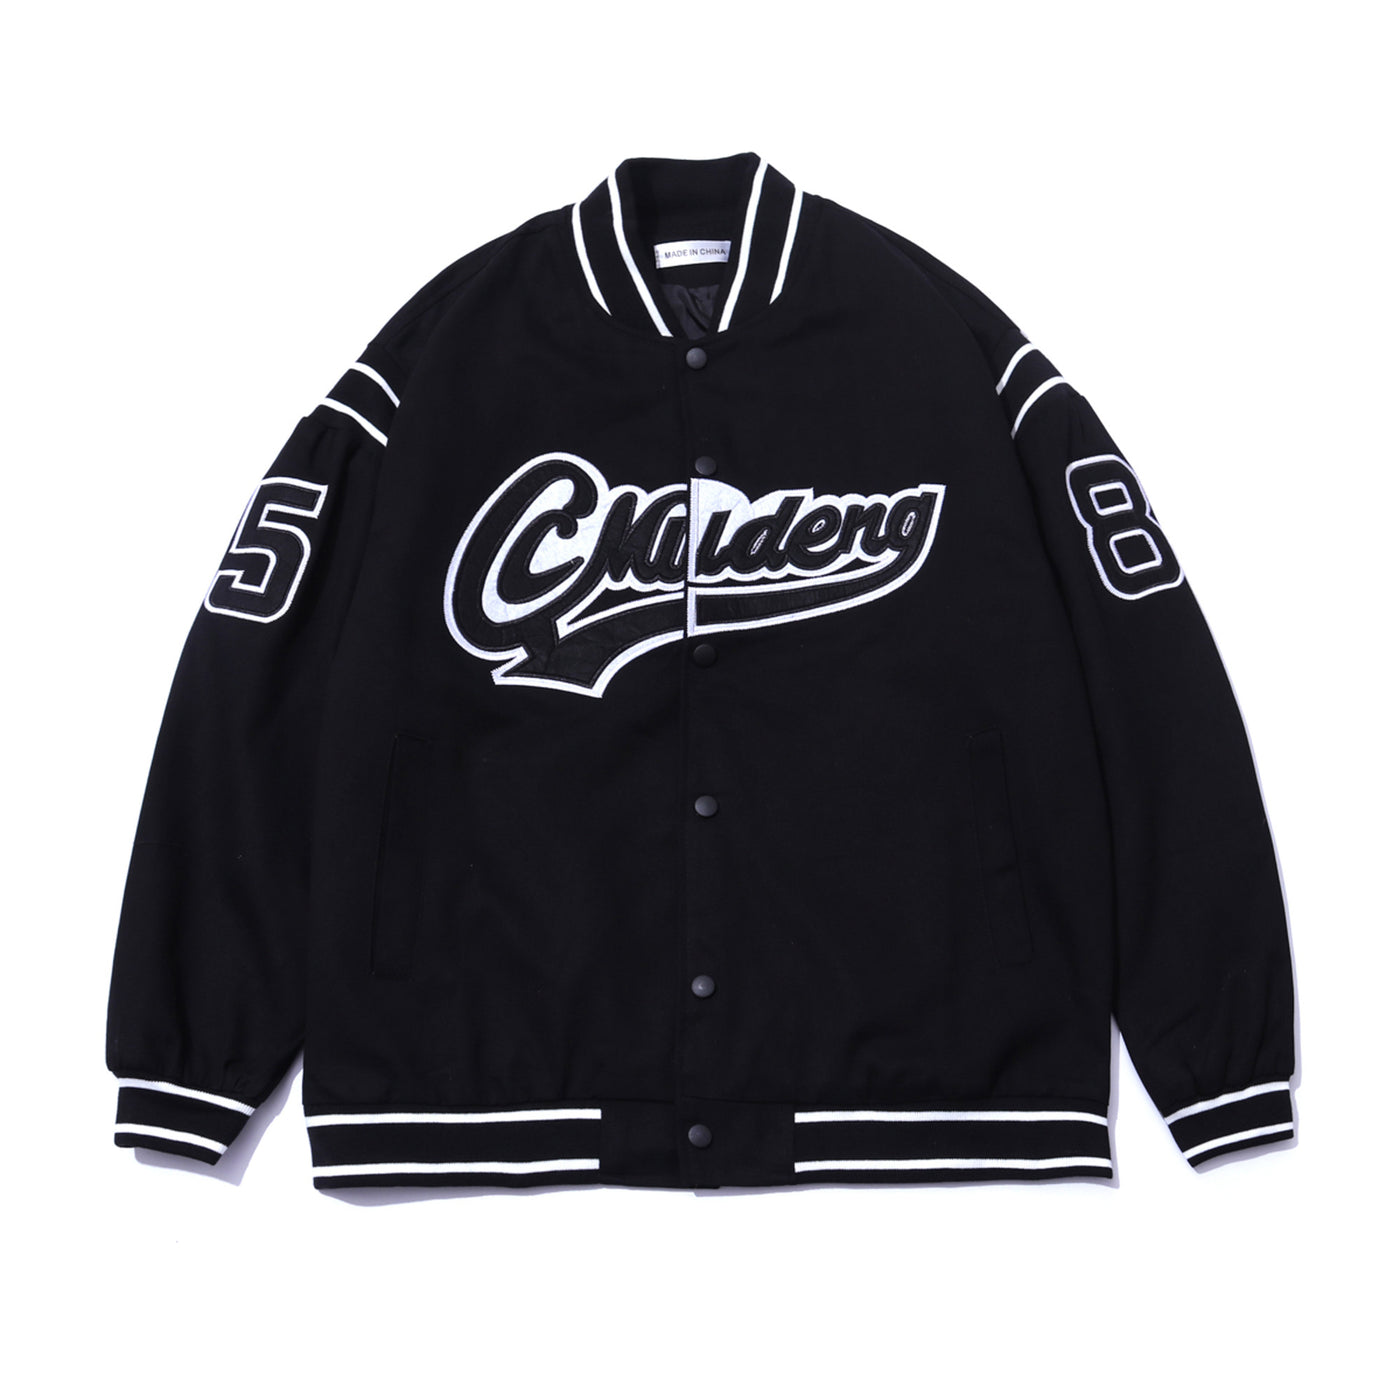 Embroidered Letters Varsity Jacket